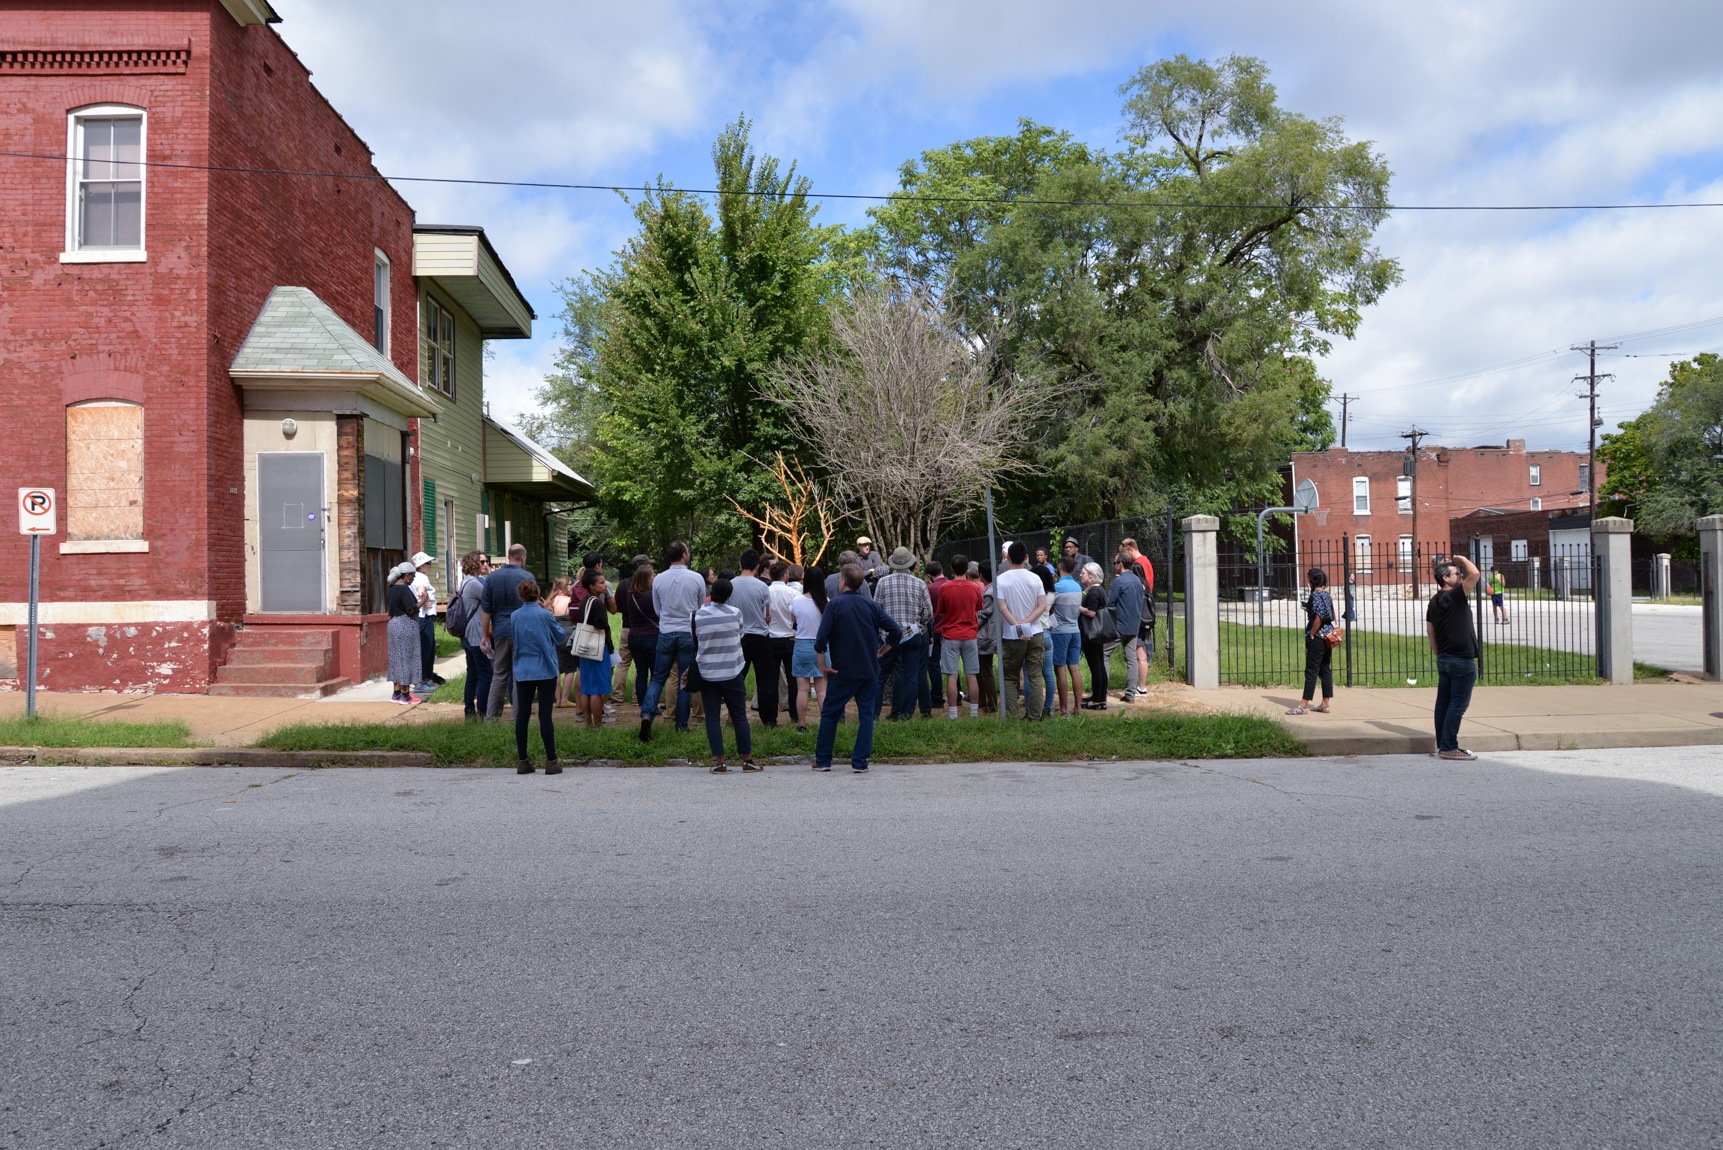 A large group gathers to listen to Amanda Williams and Andres L. Hernandez in a grassy area of a neighborhood.